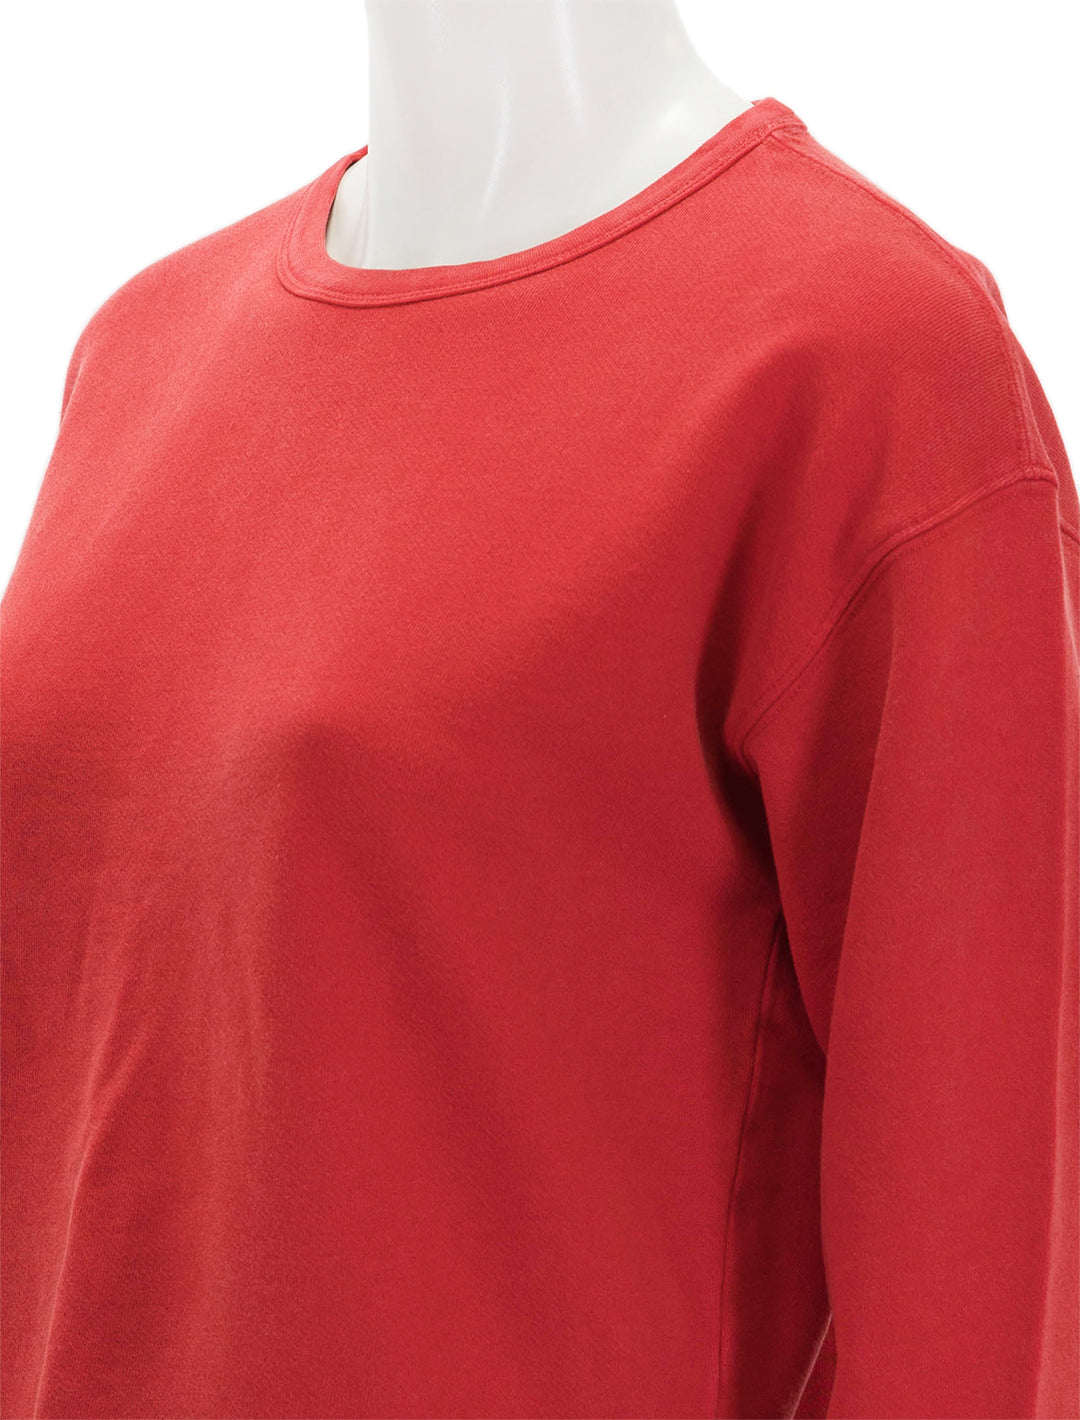 Close-up view of Alex Mill's vintage sweatshirt you've been searching for in cardinal red.